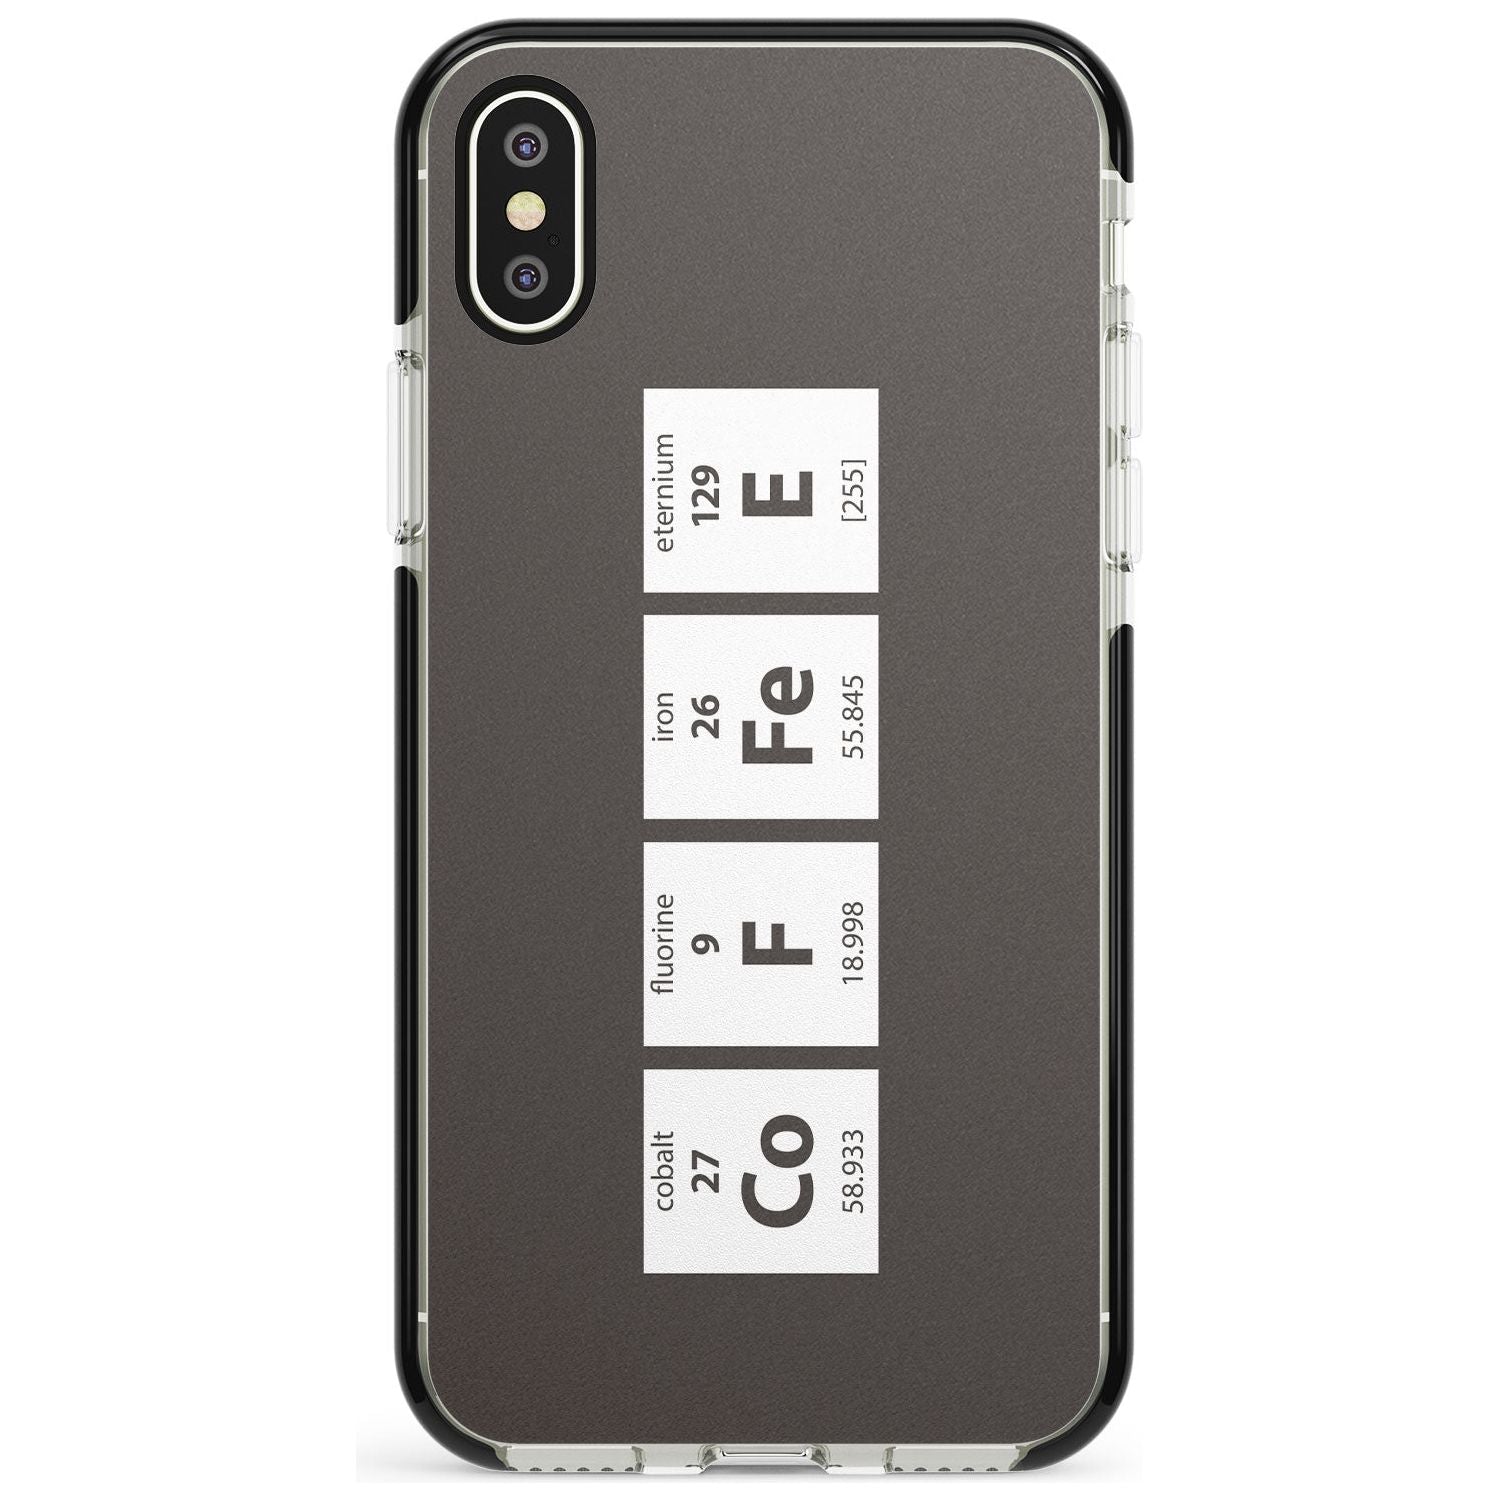 Coffee Element (Grey) Black Impact Phone Case for iPhone X XS Max XR